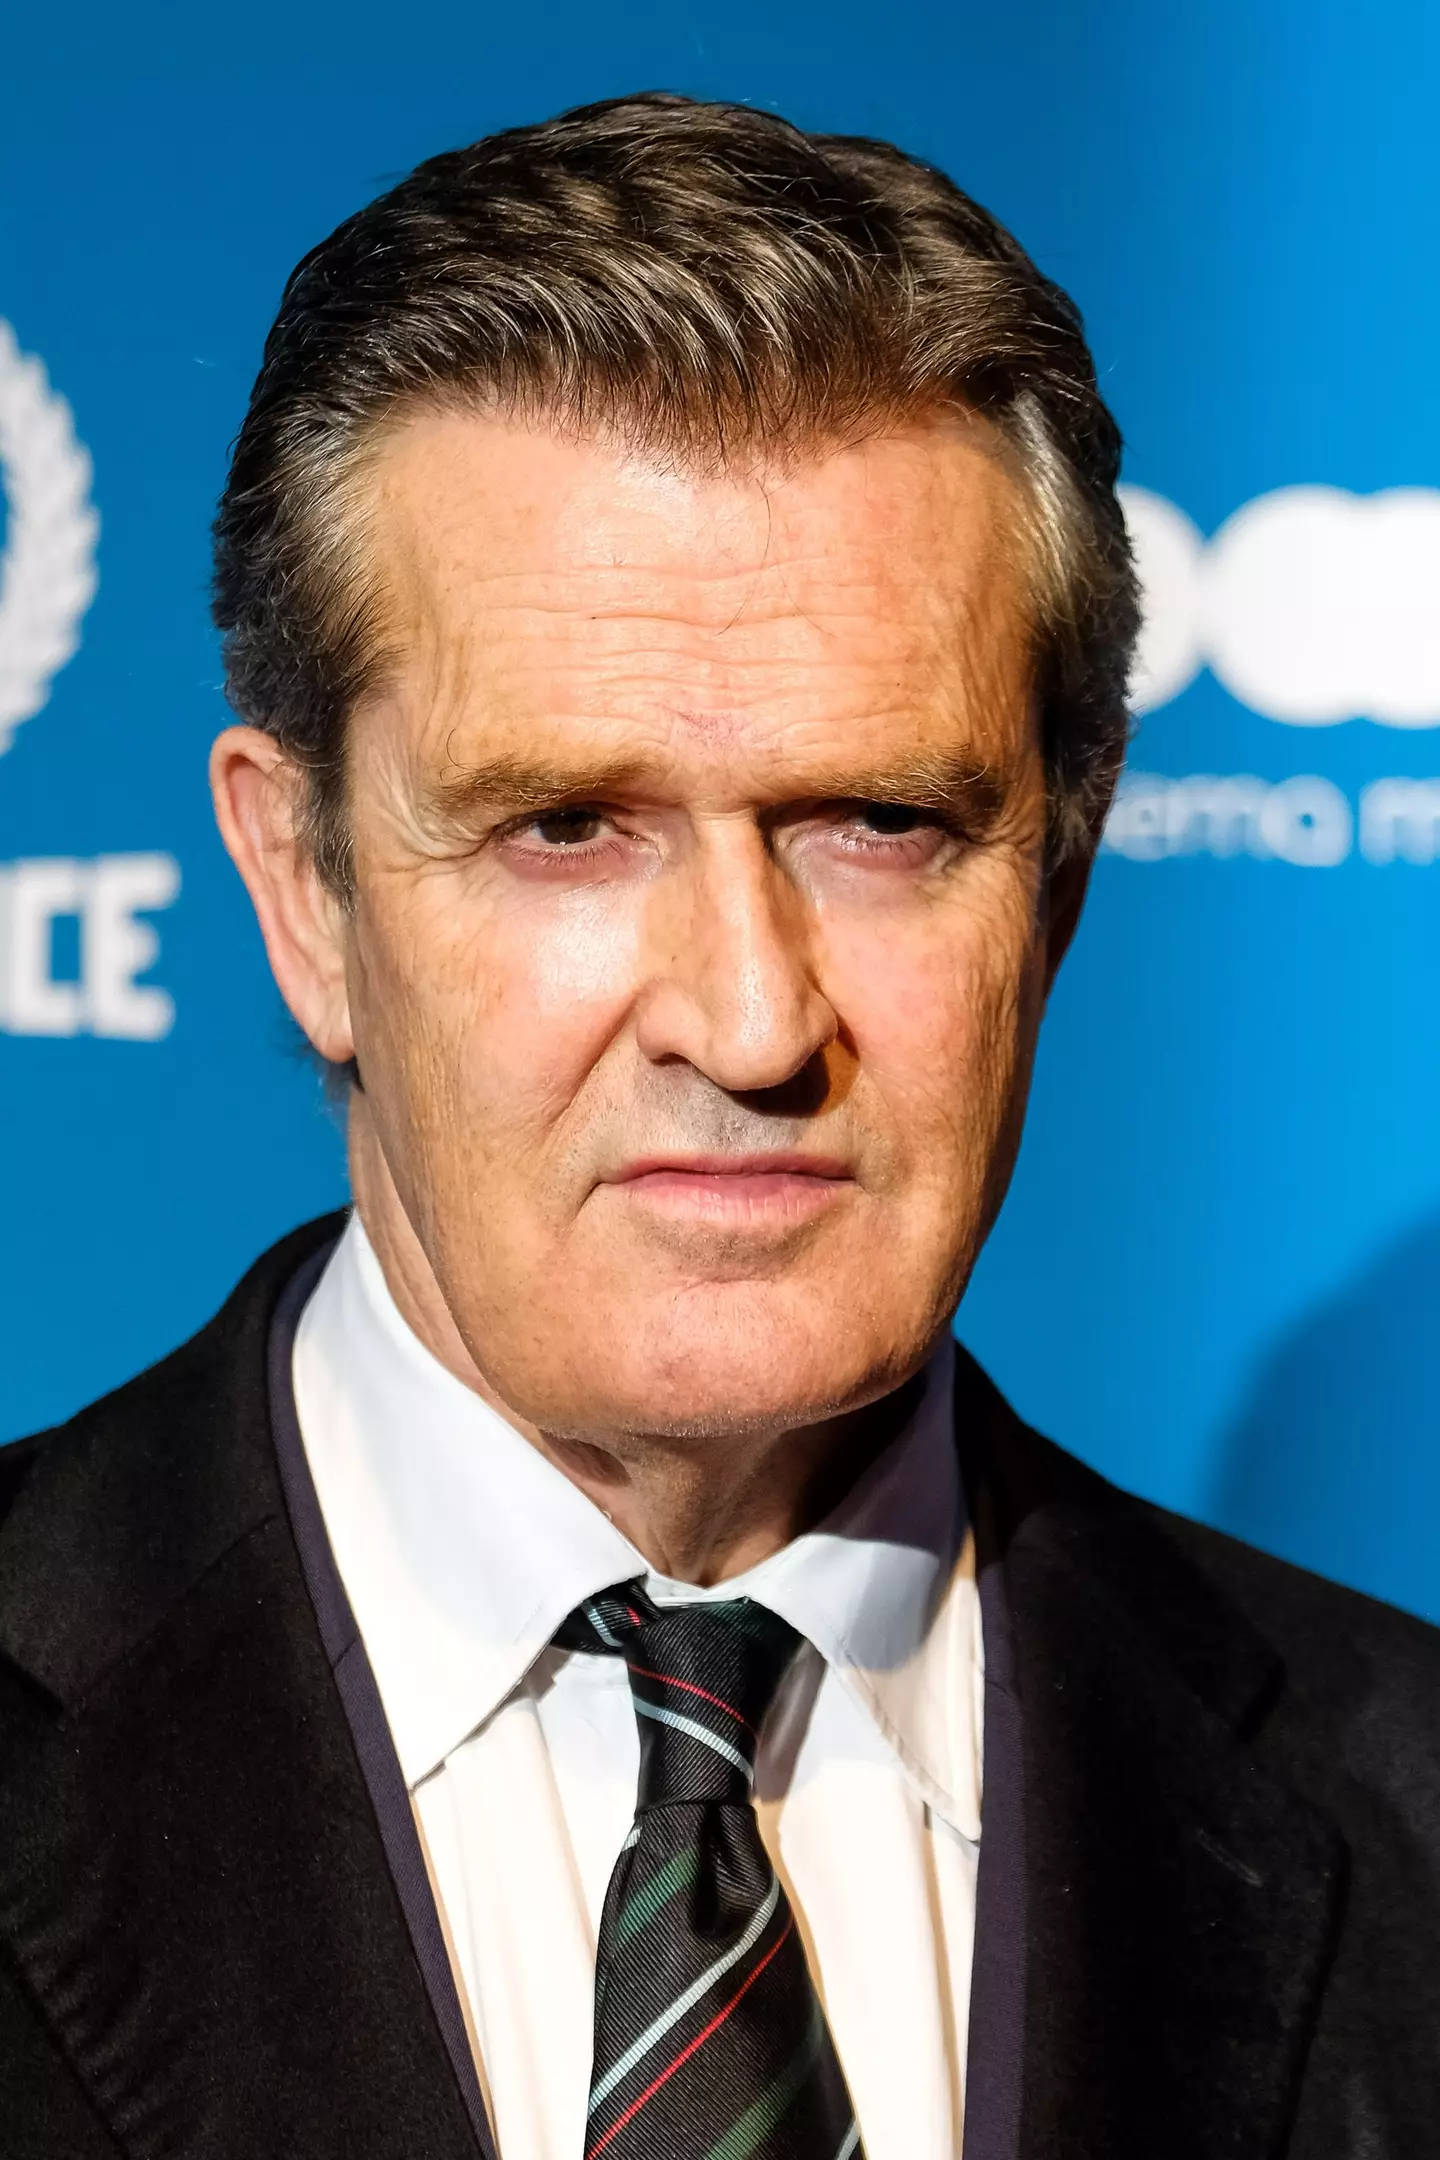 Rupert Everett says he knows who the mystery woman is.